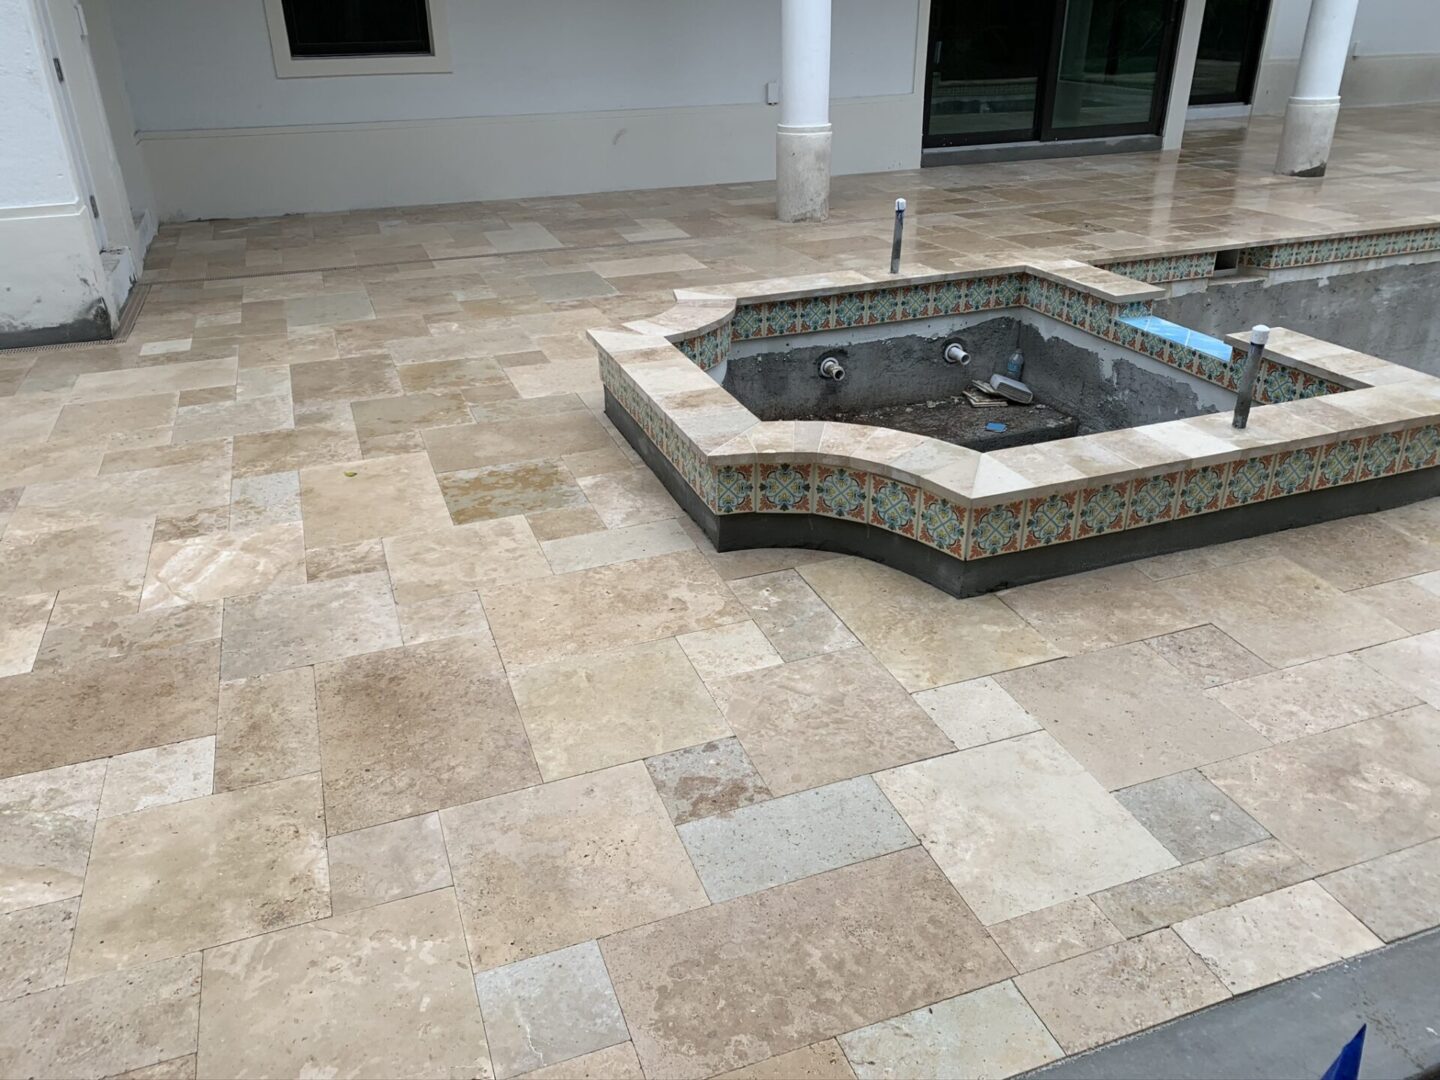 An under-construction tiled patio with an unfinished small rectangular pool featuring decorative tile borders. A building with windows and columns is visible in the background.